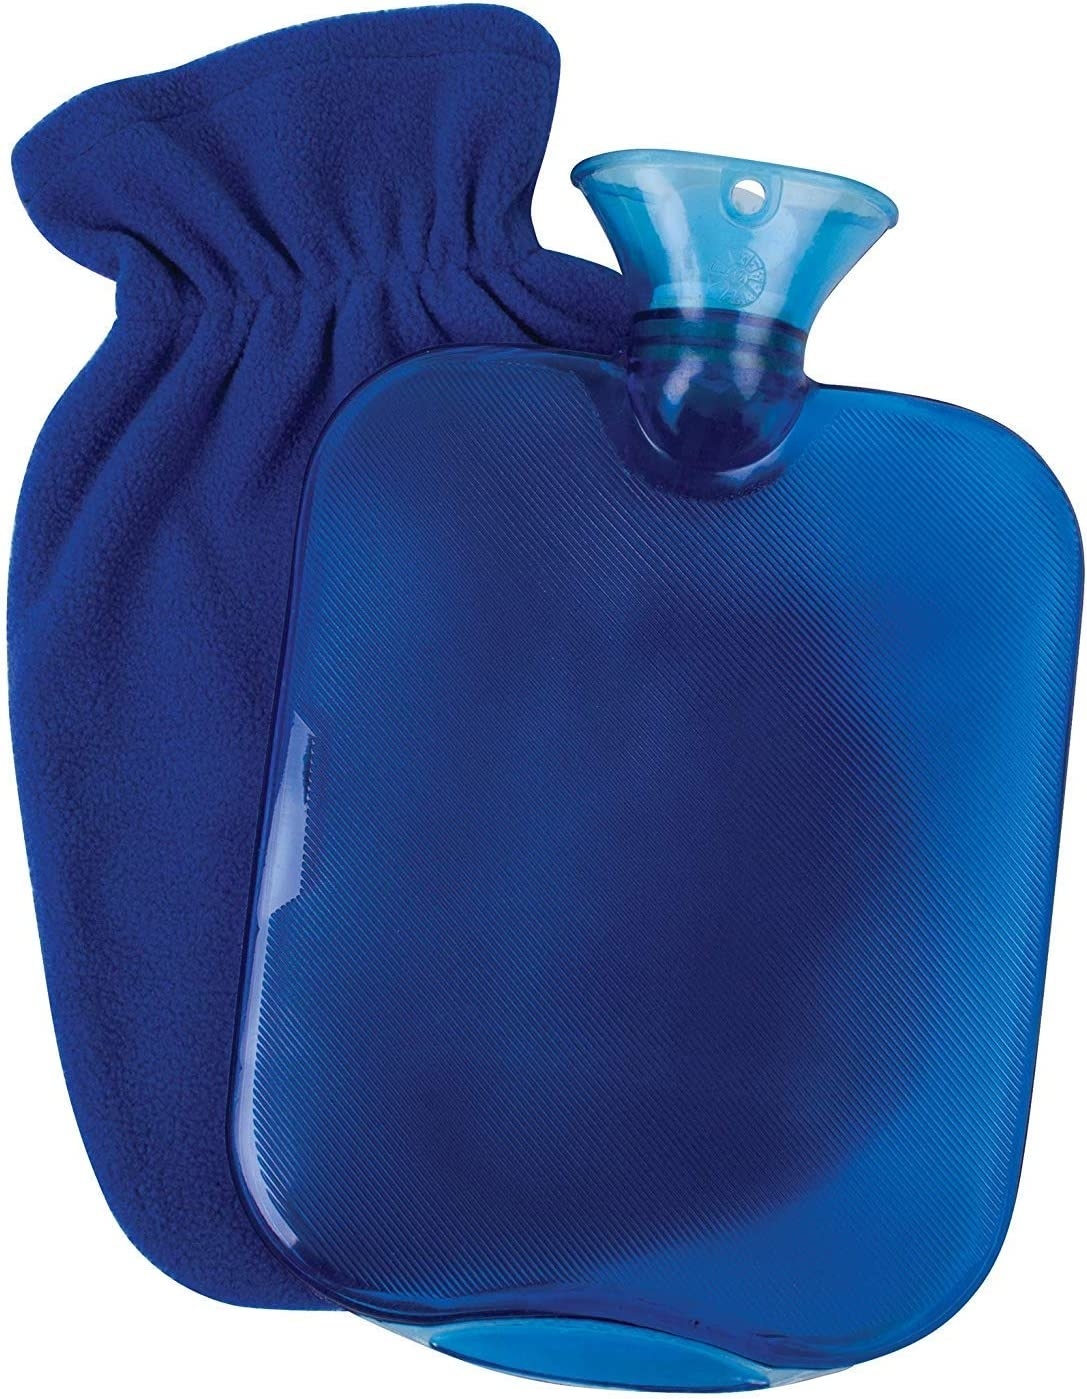 a hot water bottle and its fleece cover against a blank background